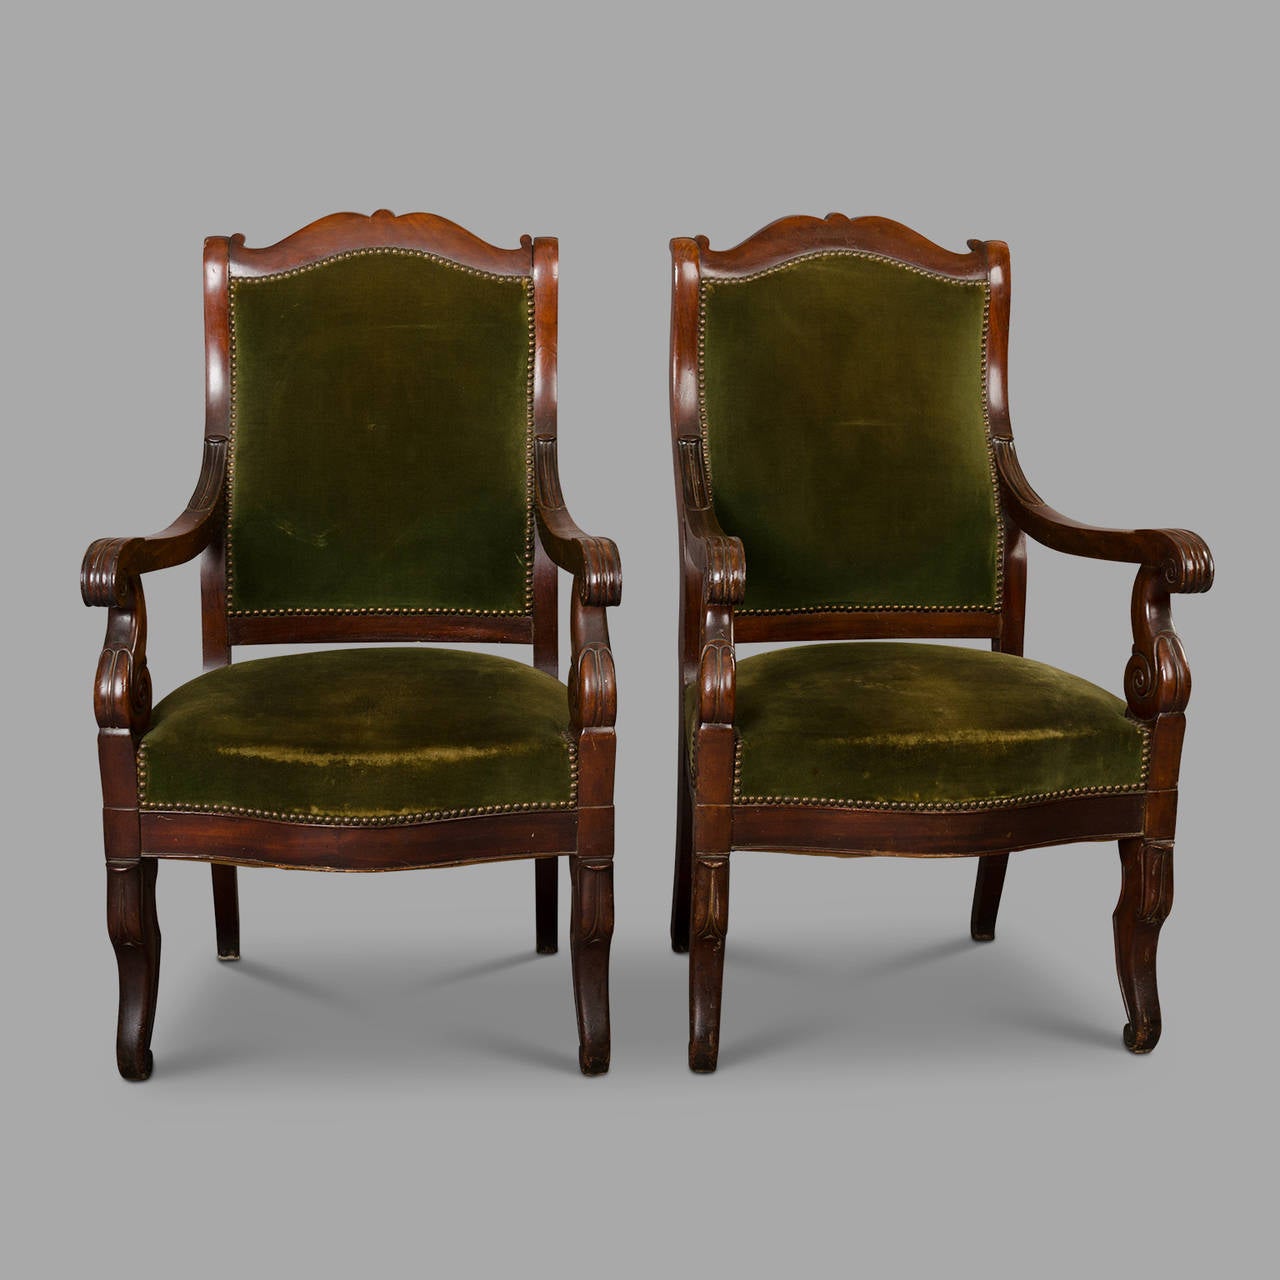 Louis-Philippe period and style armchairs in solid mahogany covered with green velvet fabric. Very good overall condition.